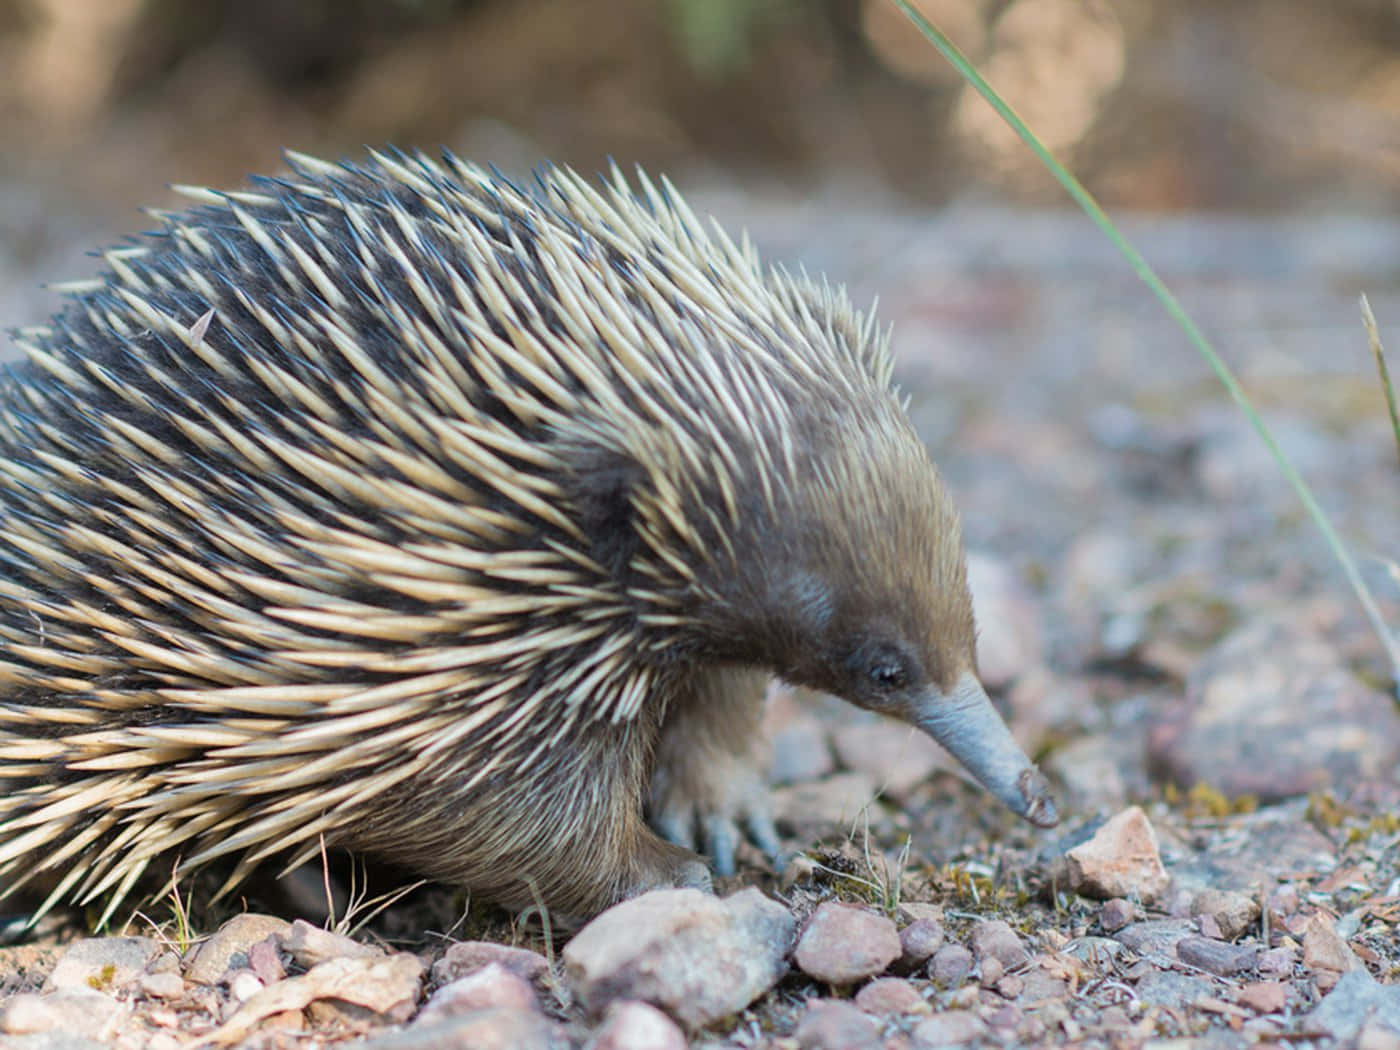 A Small Echidna Walking On The Ground